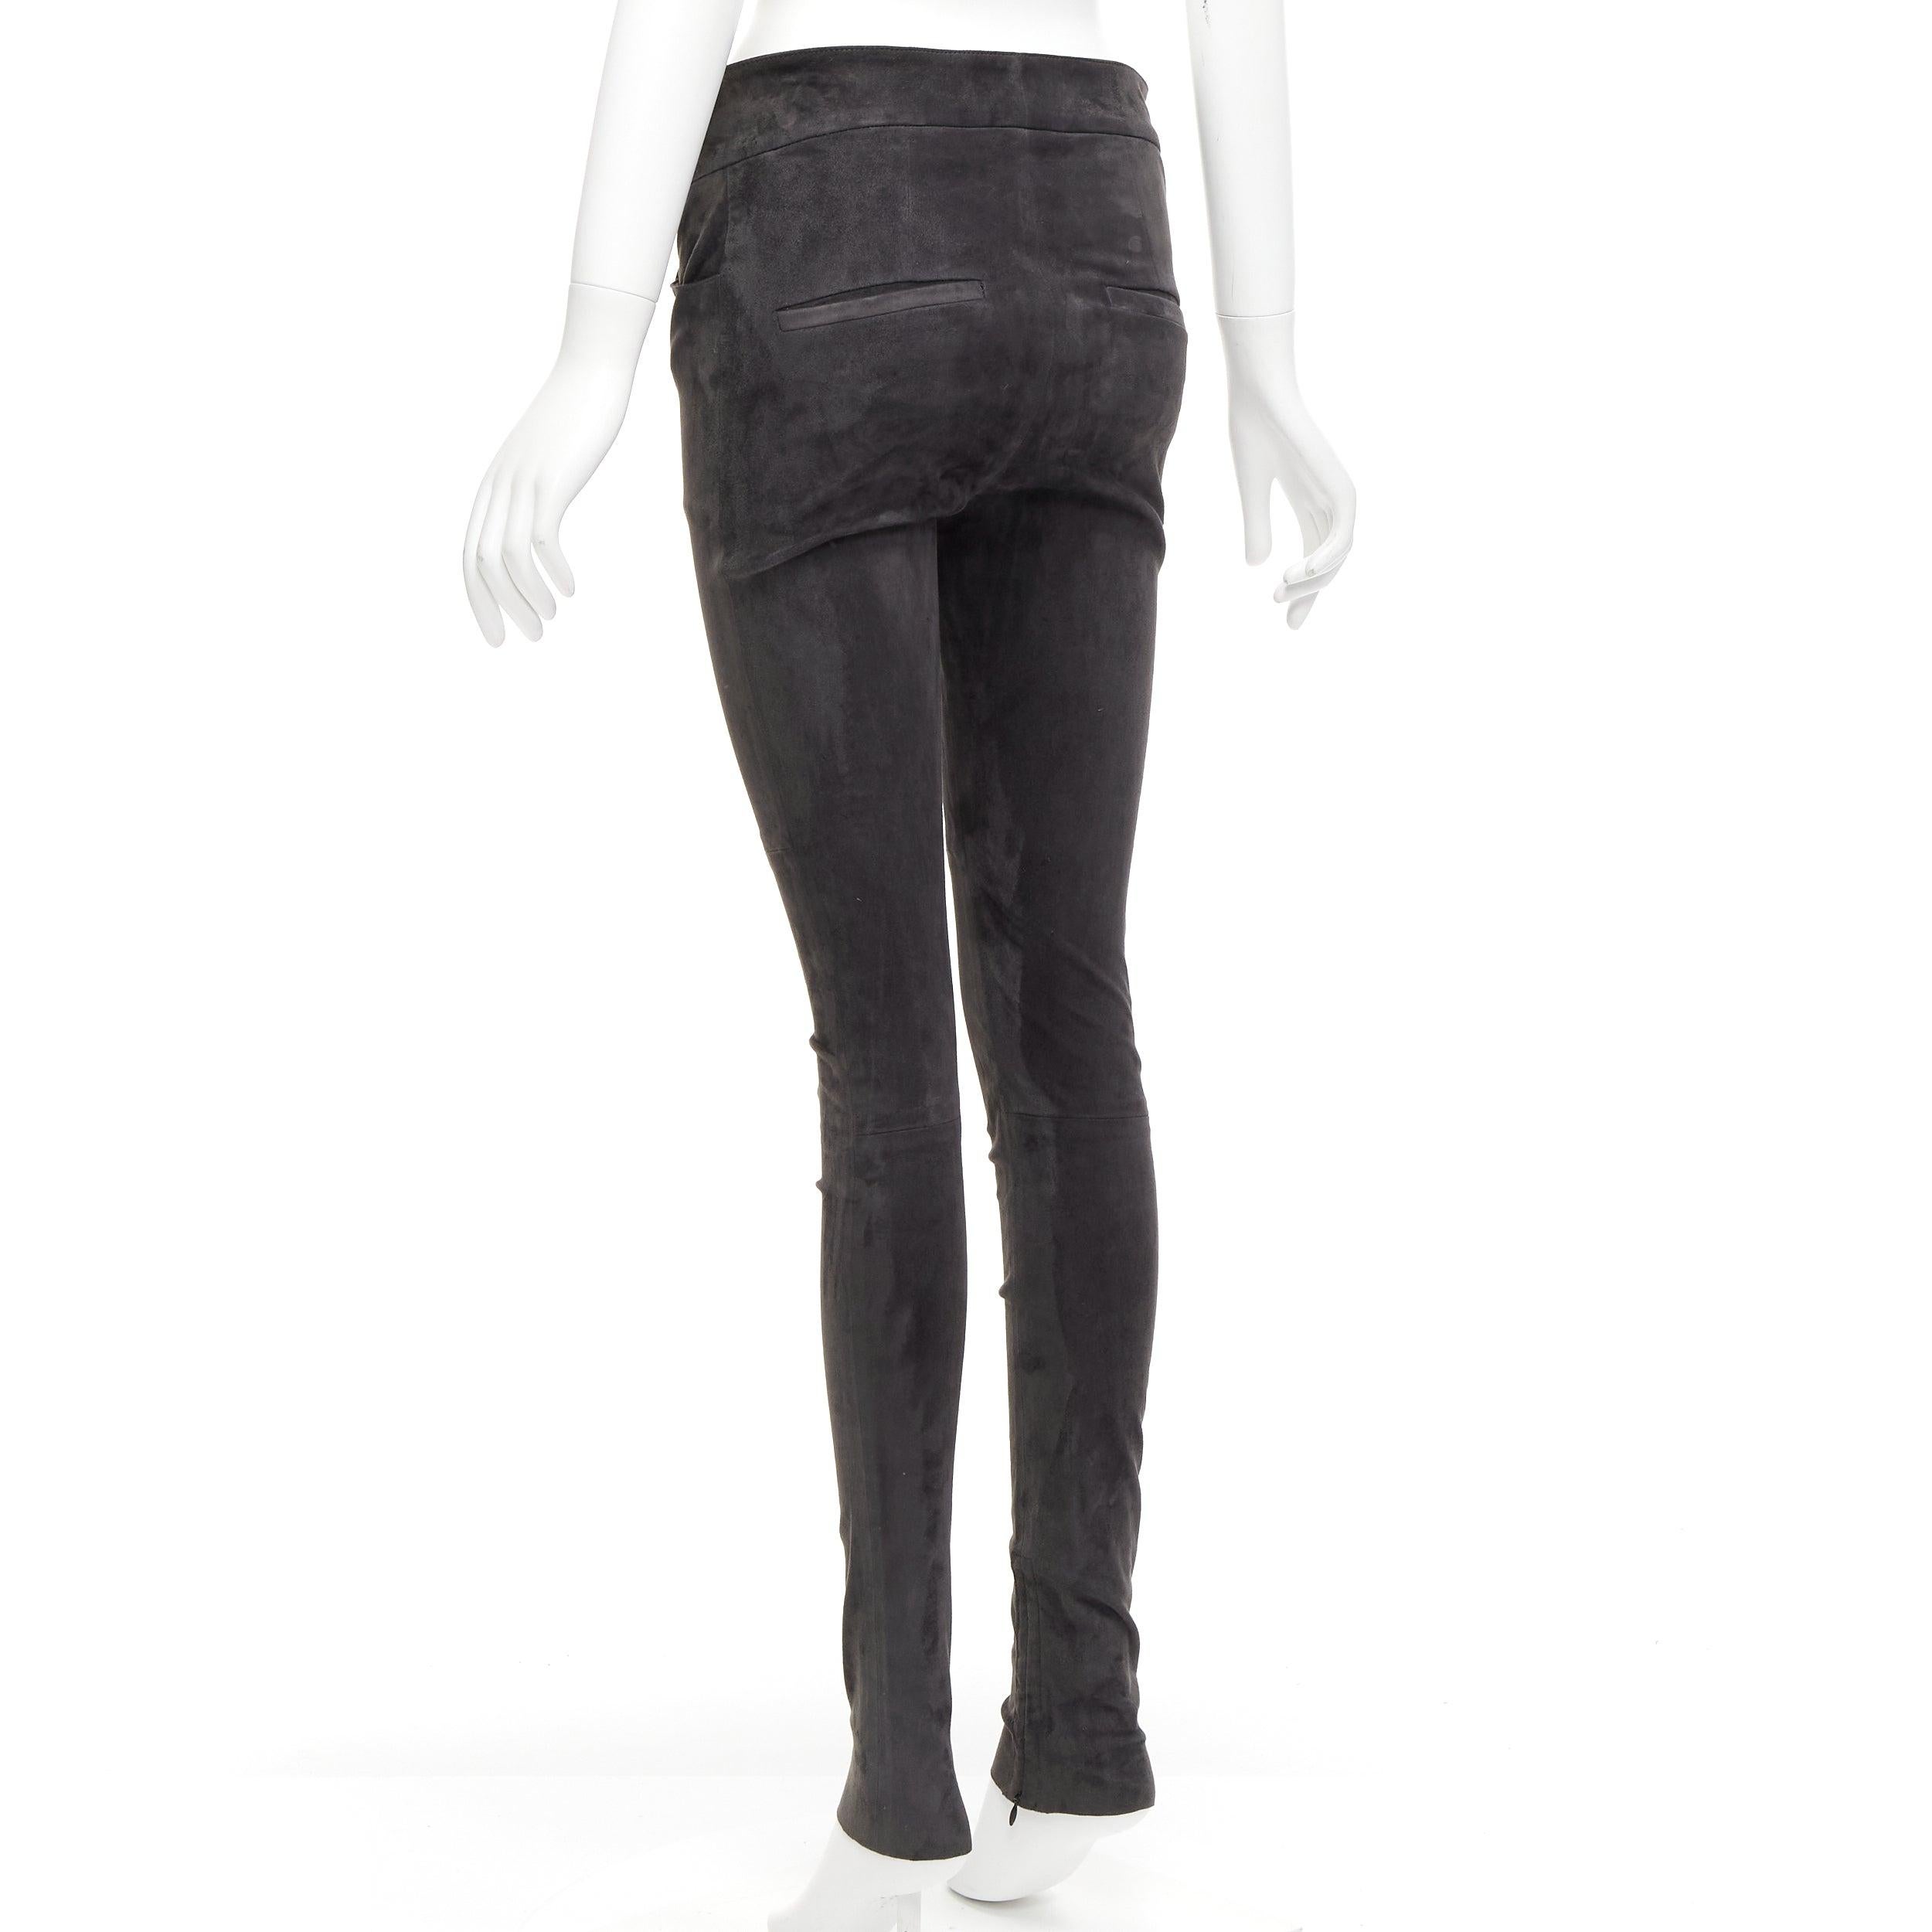 ISABEL MARANT 100% lambskin suede leather grey high waisted skinny pants FR36 S For Sale 1